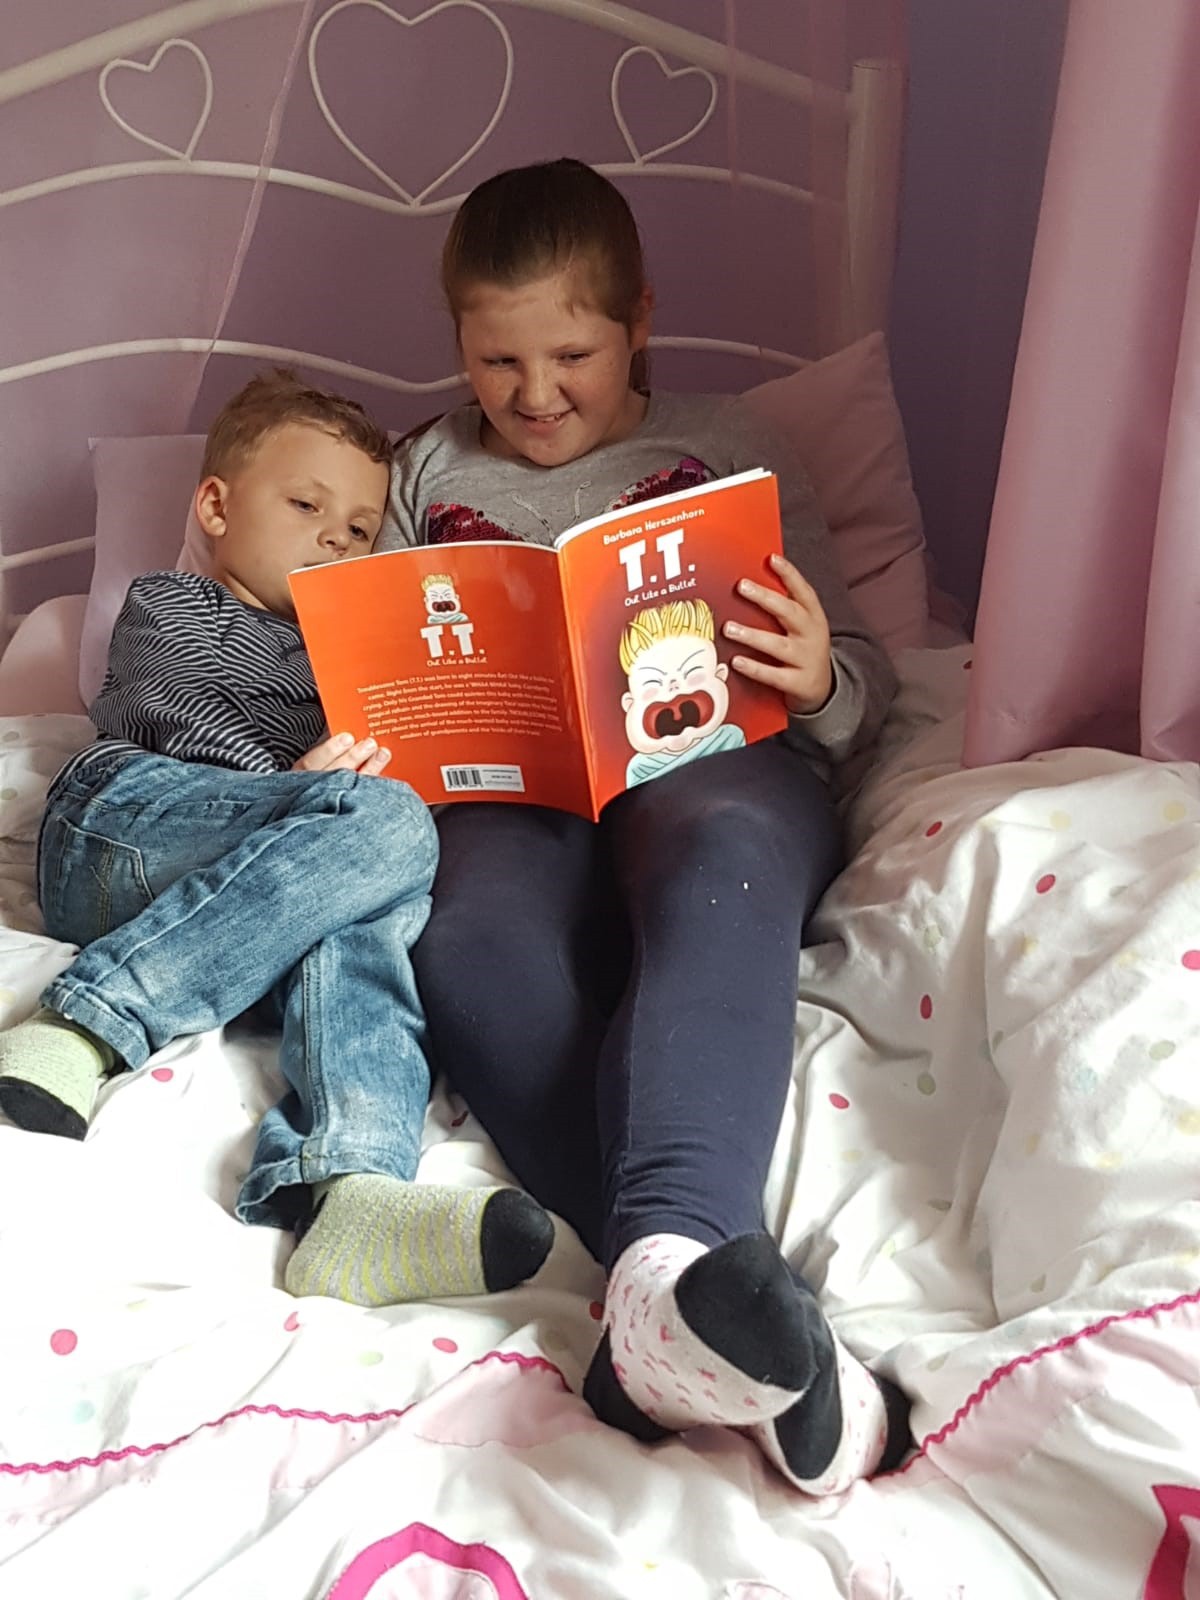 Two young fans reading the book Troublesome Tom, 27-Oct-18